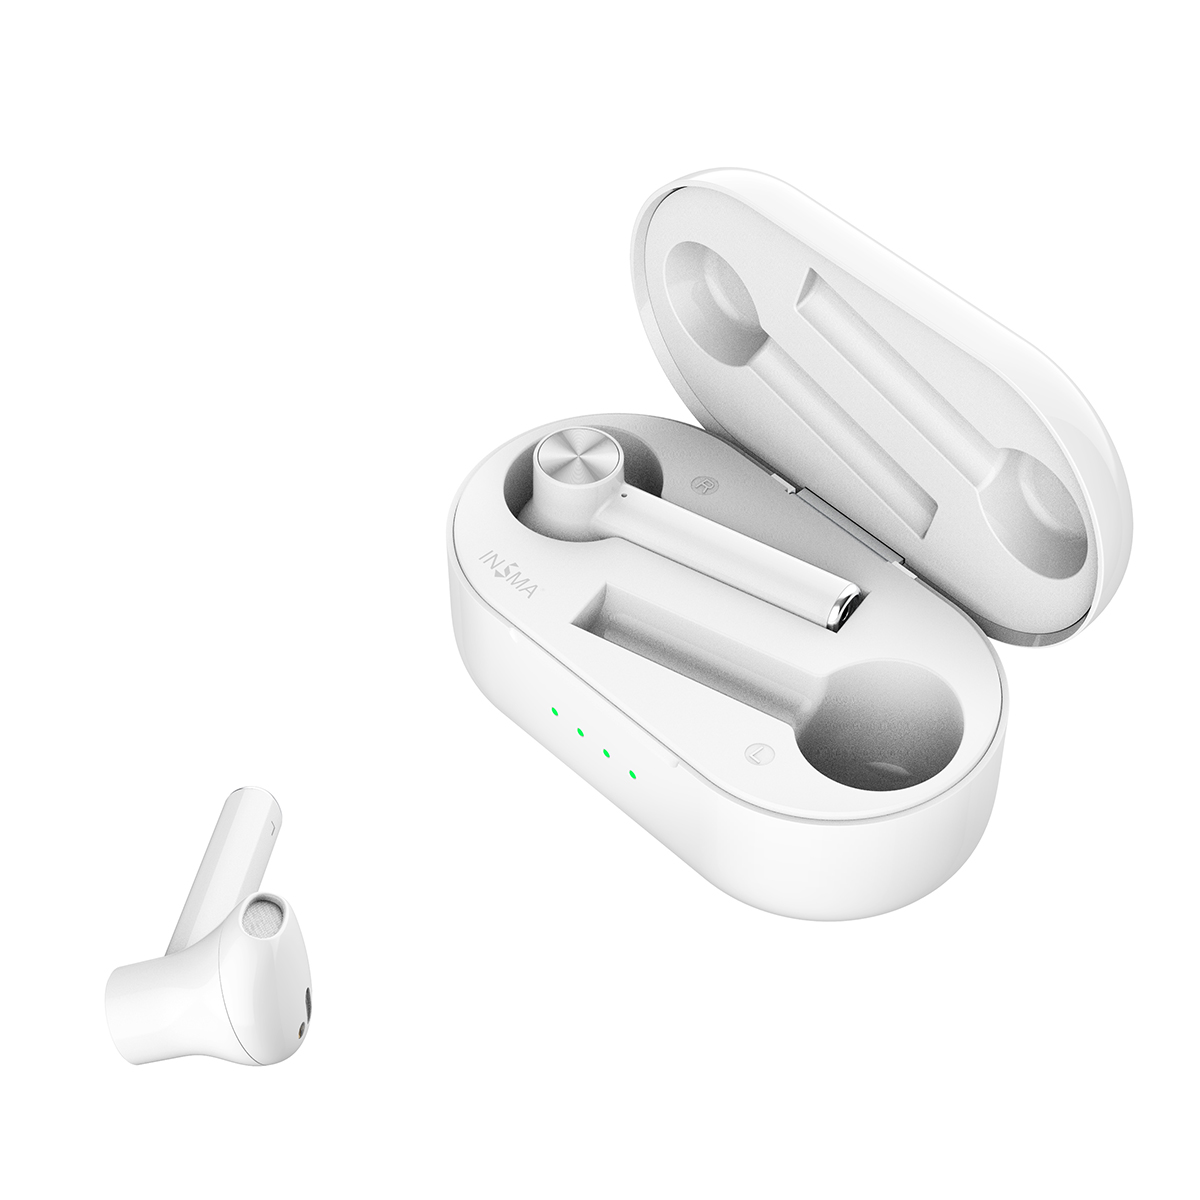 Find INSMA AirBuds 2 bluetooth 5 0 TWS Stereo Waterproof In ear Earphone Built in Mic Support Wireless Charging for Sale on Gipsybee.com with cryptocurrencies